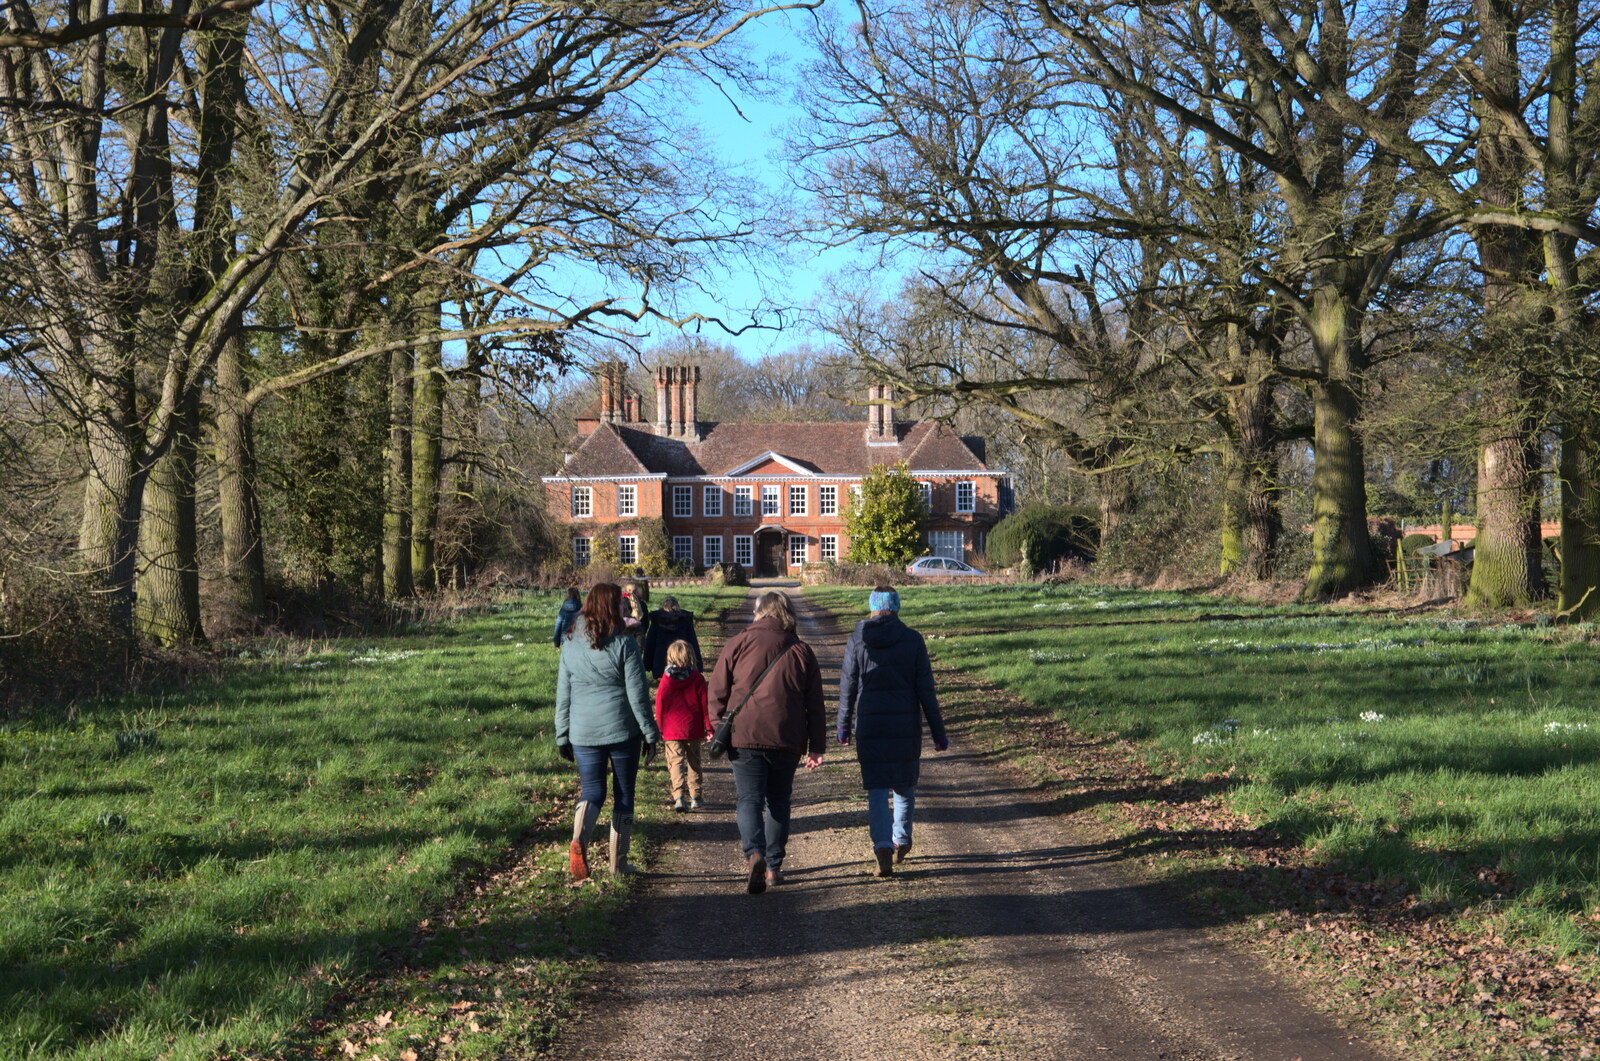 Walking up the long drive to the hall from Snowdrops at Talconeston Hall, Tacolneston, Norfolk - 7th February 2020